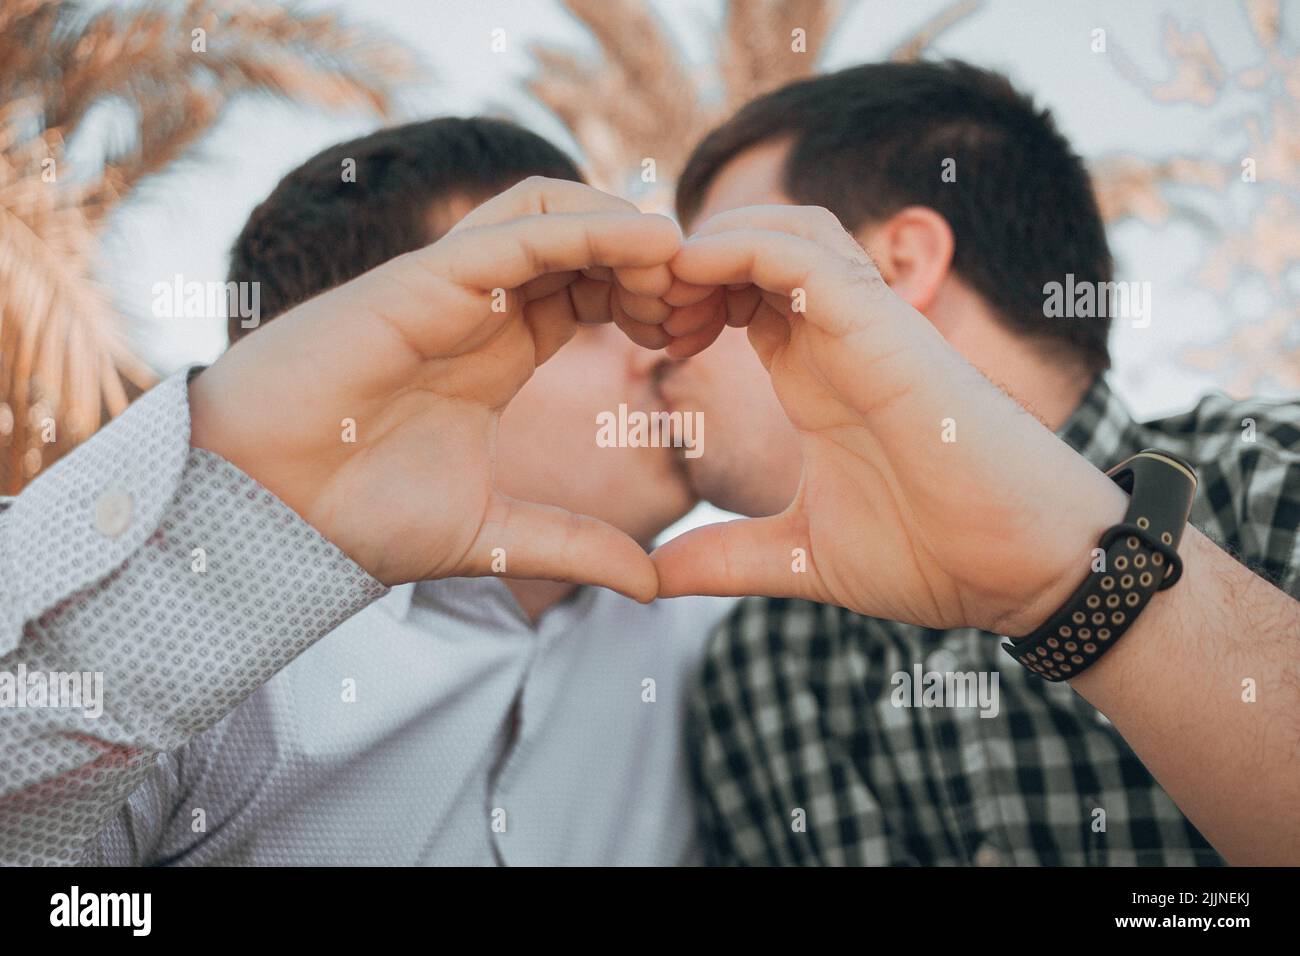 A couple of Spanish men kissing each other while showing hands heart sign - LGBT concept Stock Photo